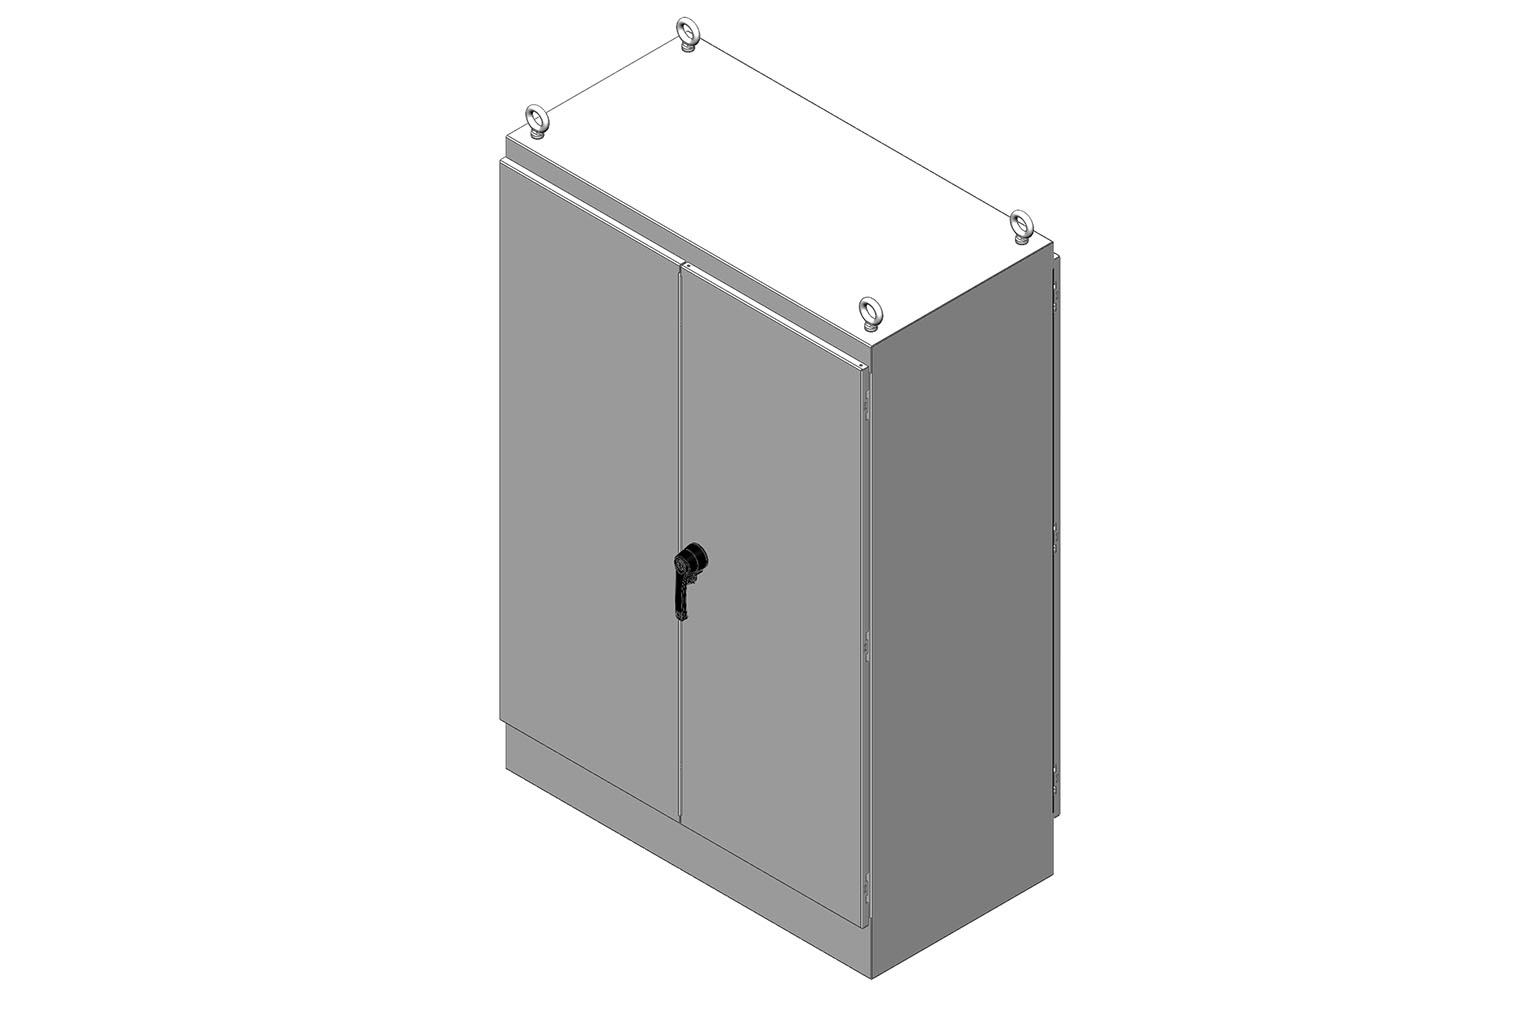 RMR Free-Standing Enclosure, Type 12, Dual Access with Solid Double Door - Image 0 - Large